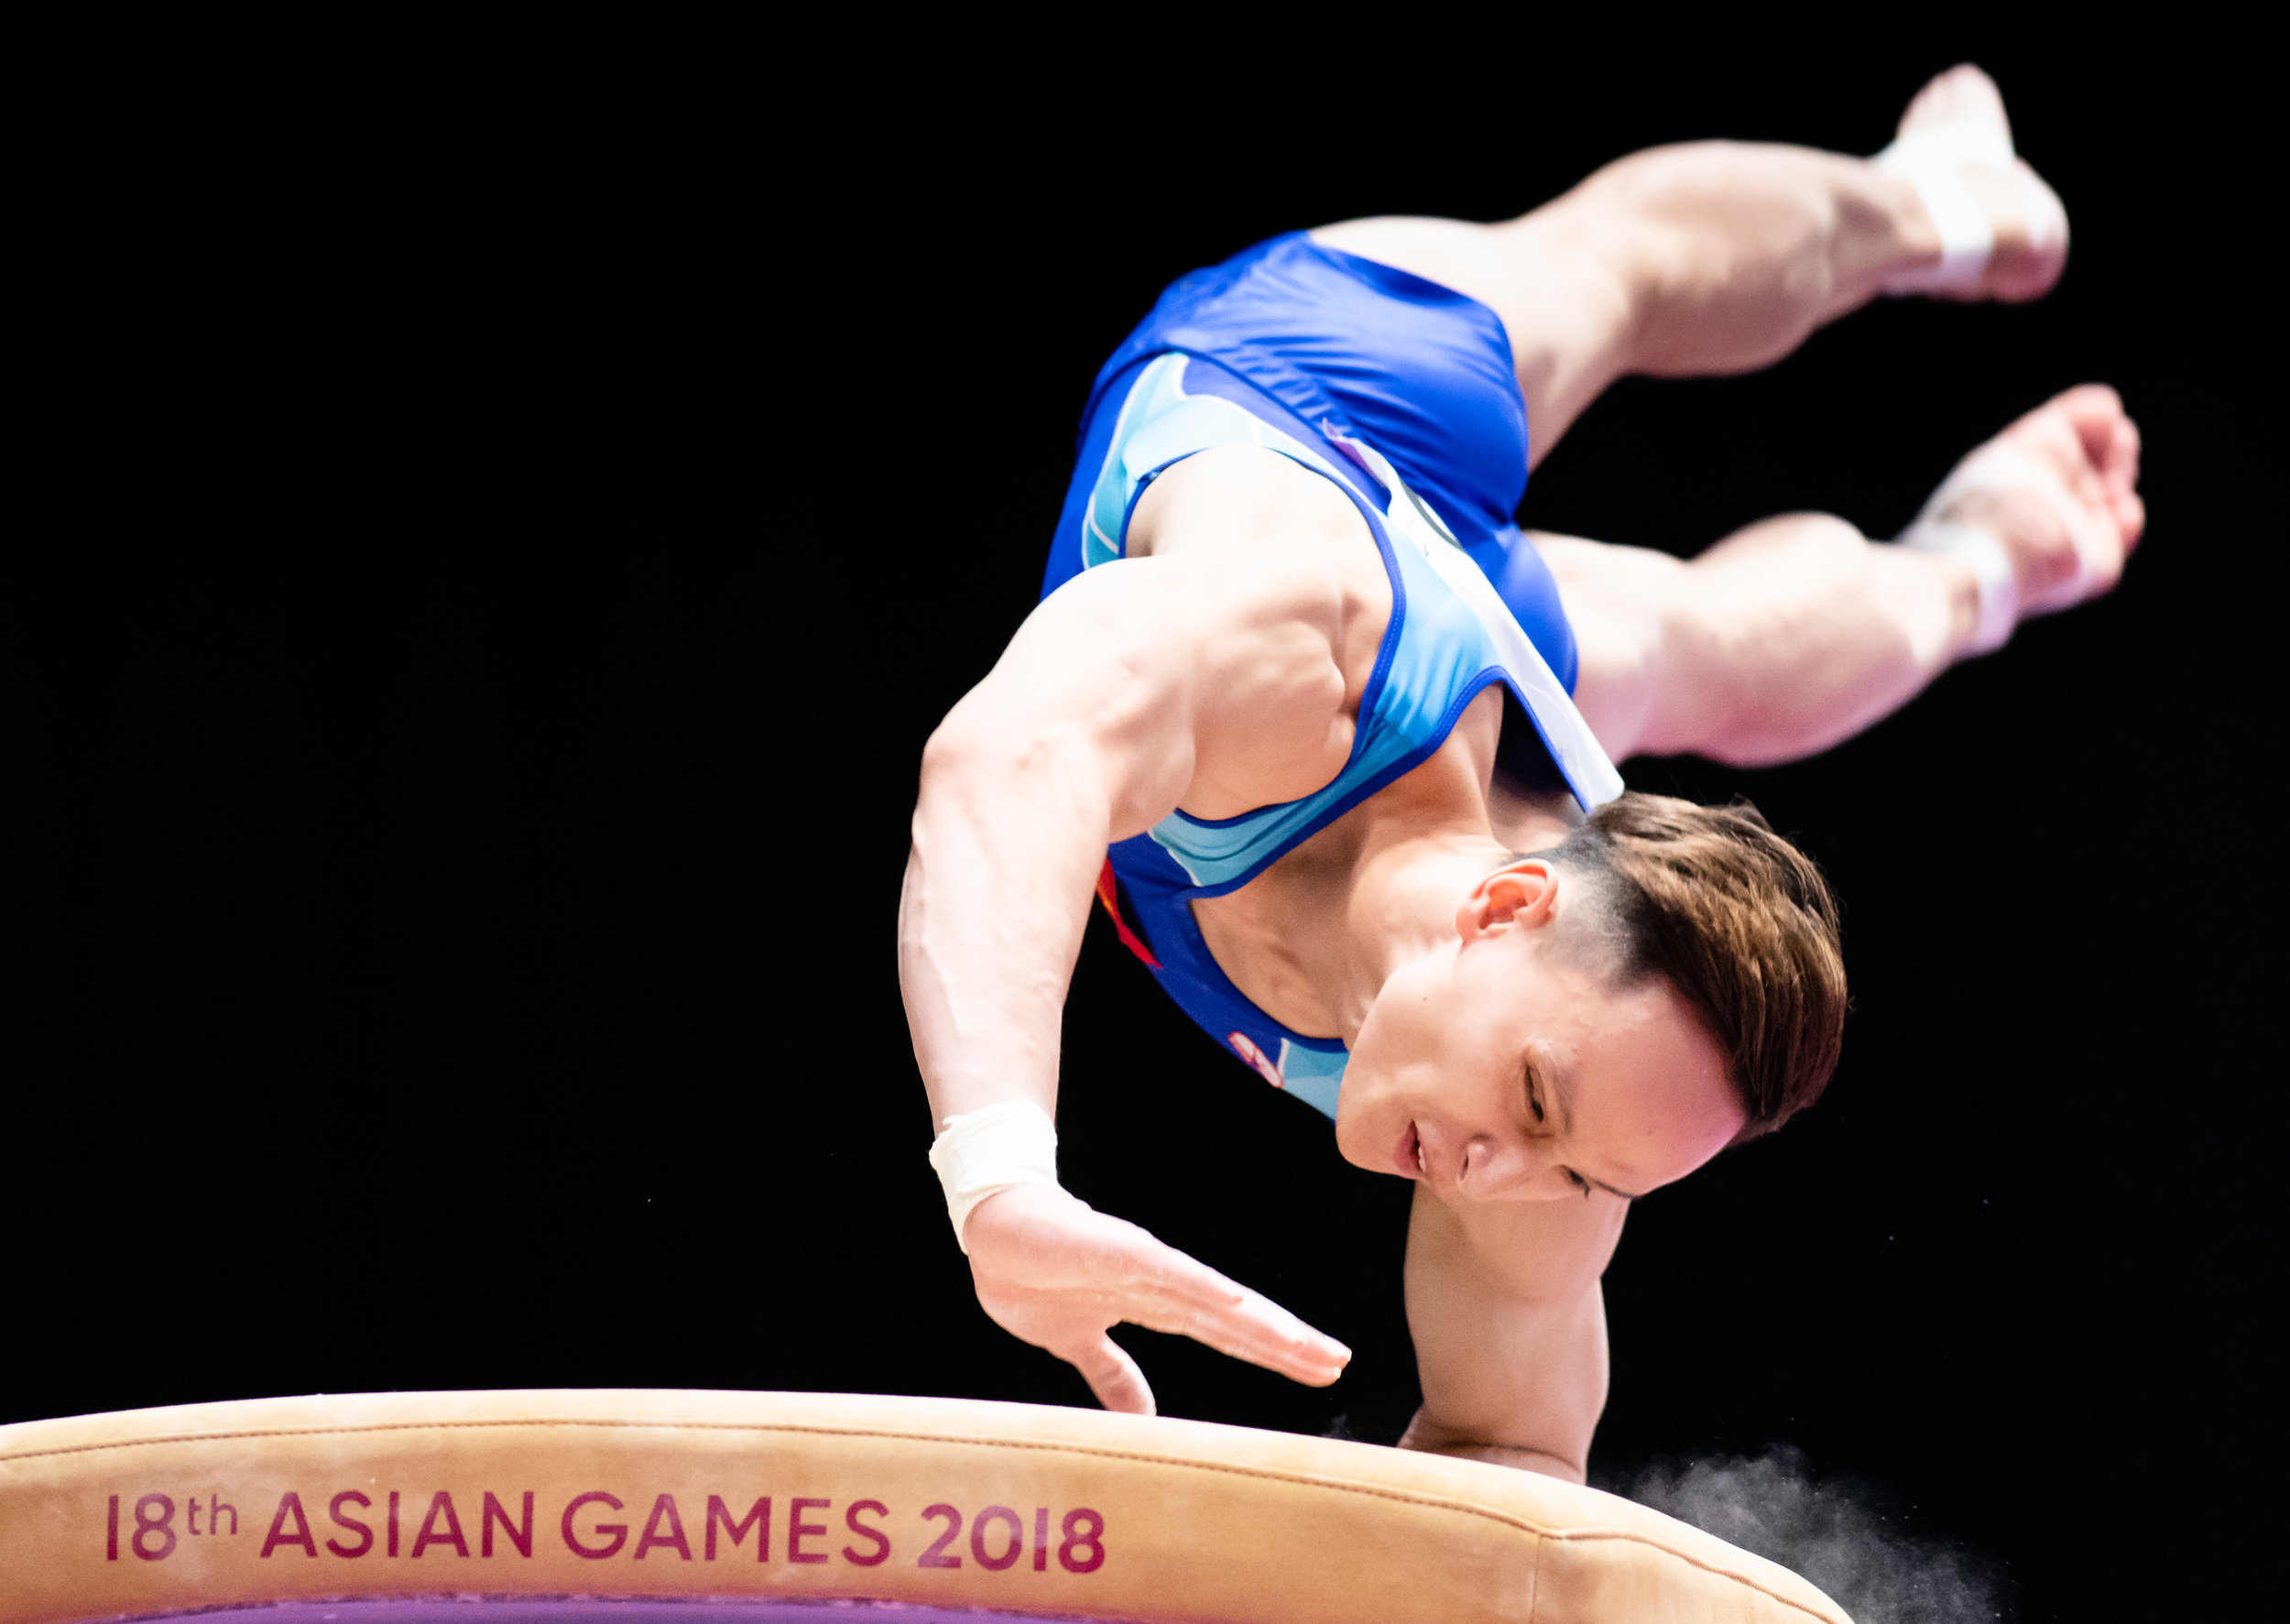 A Vietnamese gymnast during the Men's Artistic Gymnastics Qualifiers of the Asian Games at the Jakarta Convention Centre.